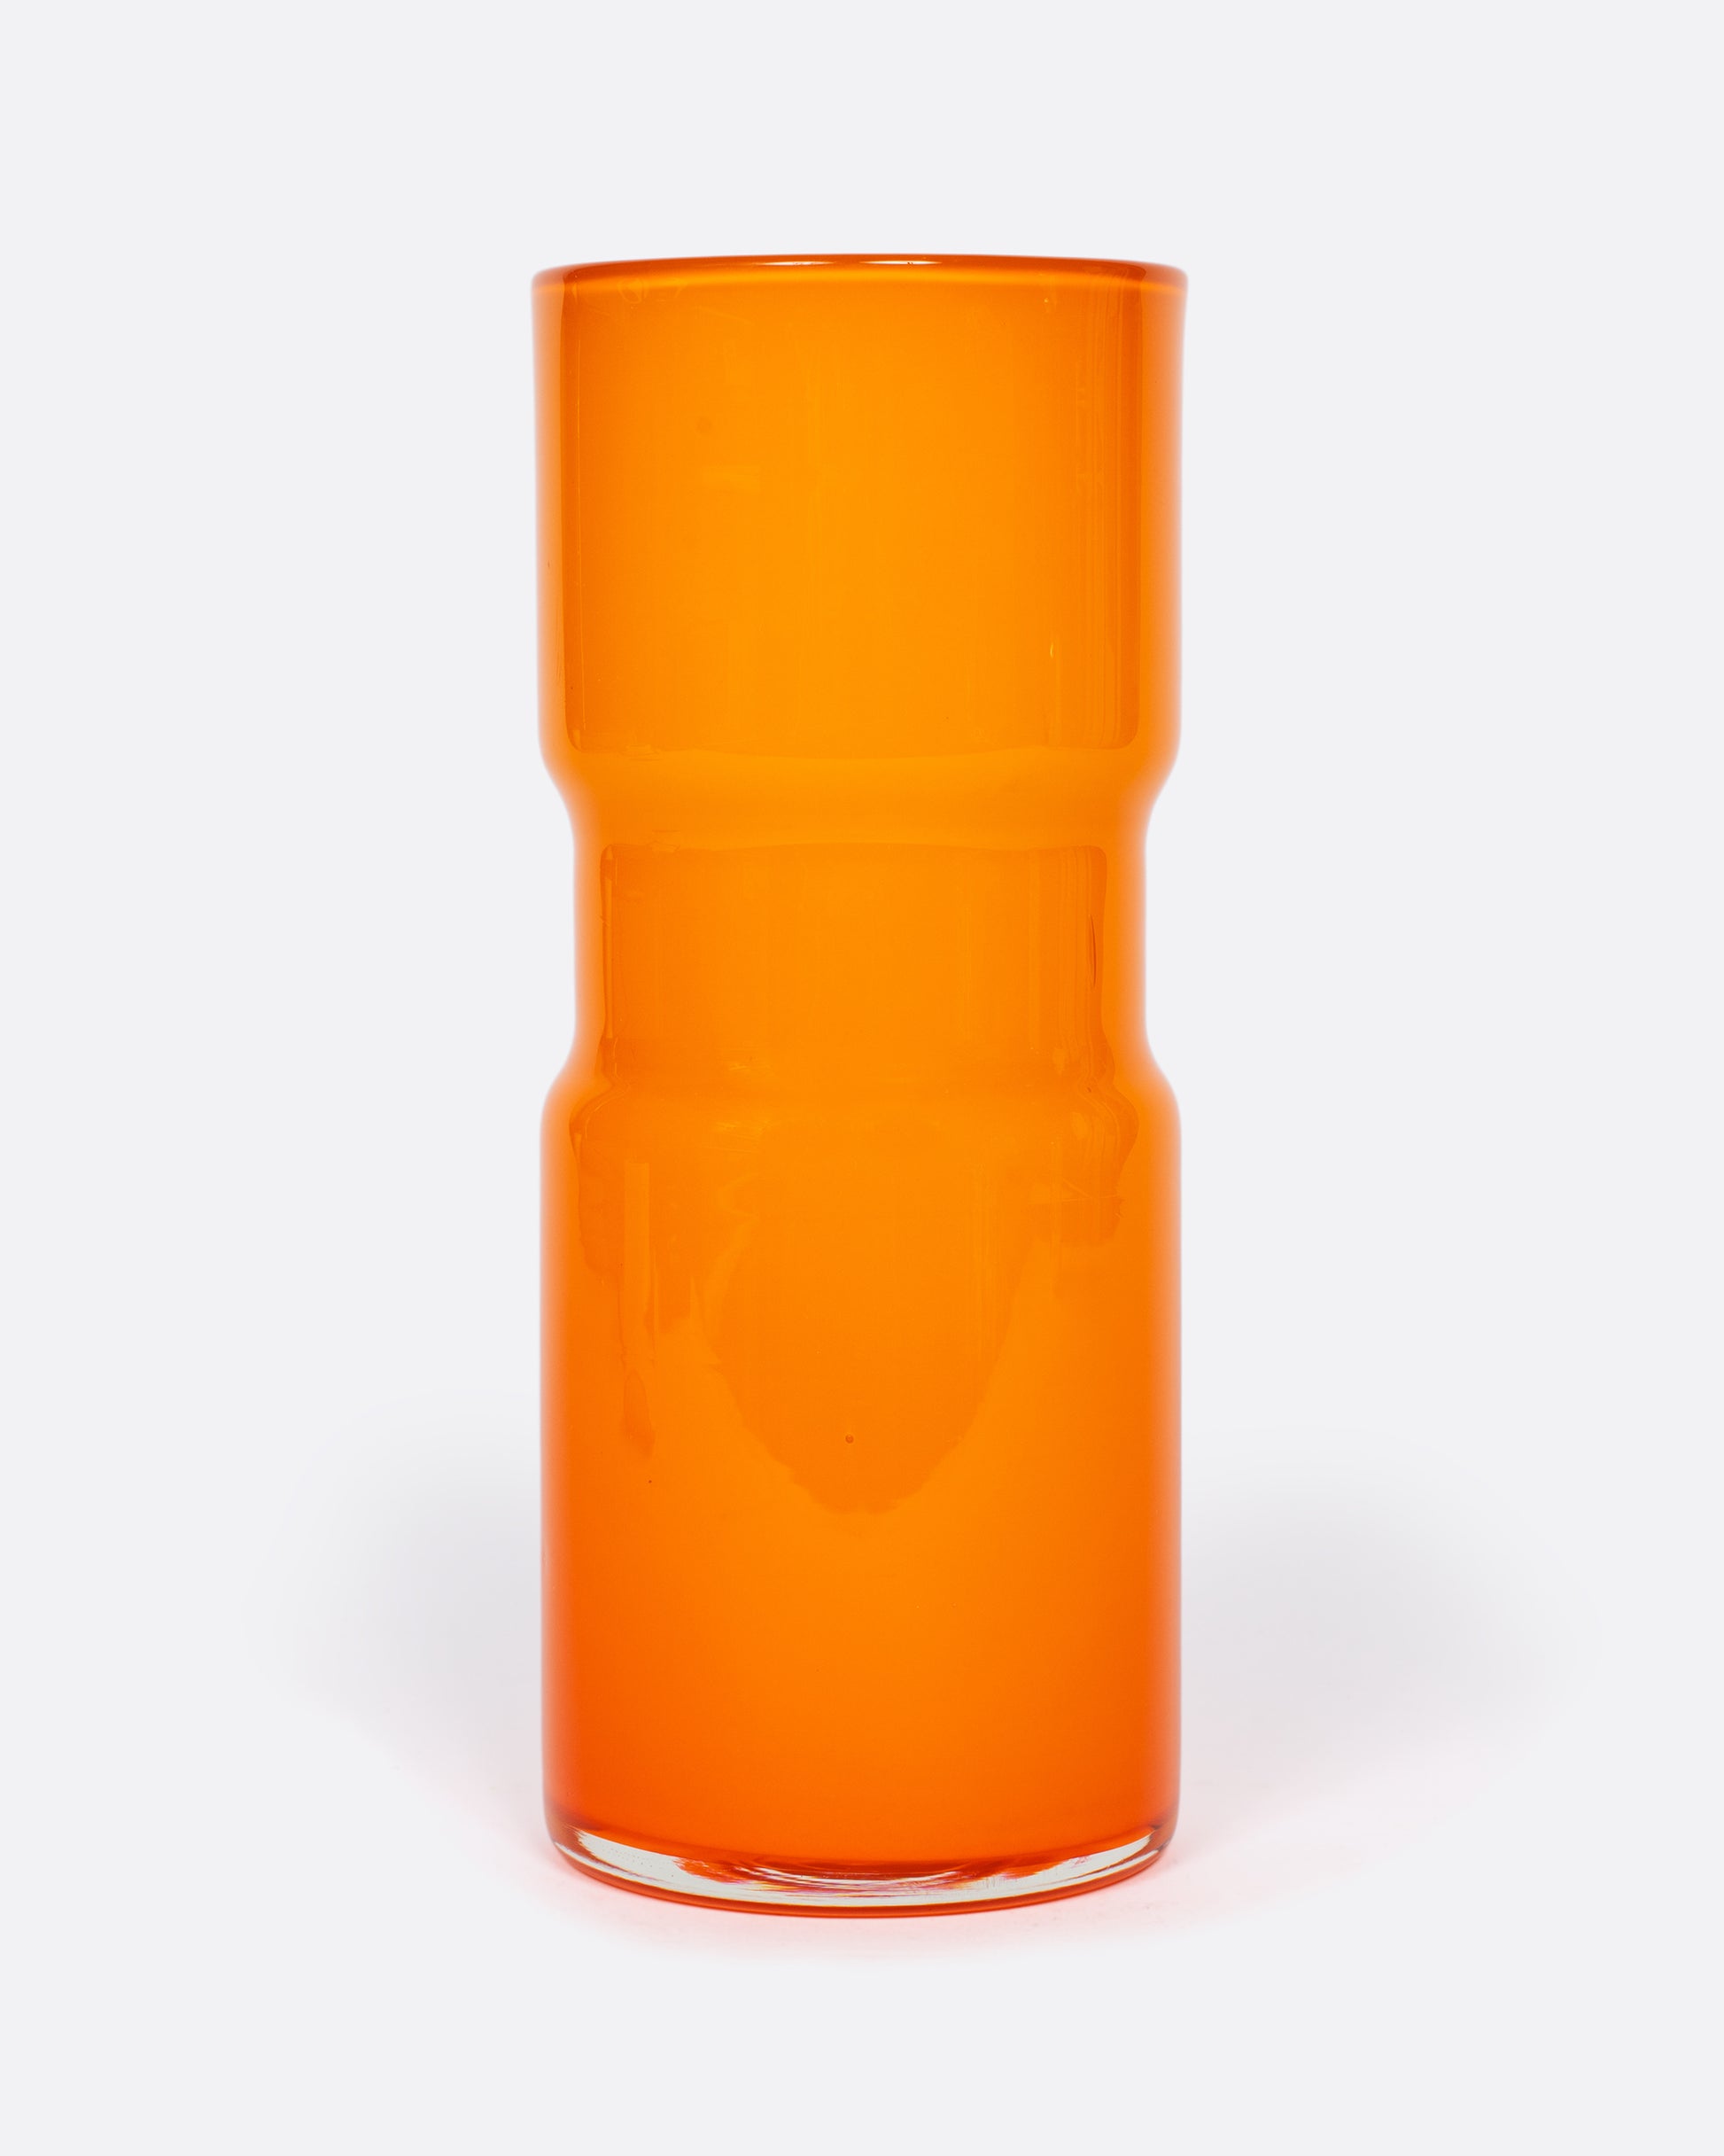 A citrus orange vintage cased glass pitcher made by layering orange glass over over white glass. It's the perfect splash of color for your summer tablescape.